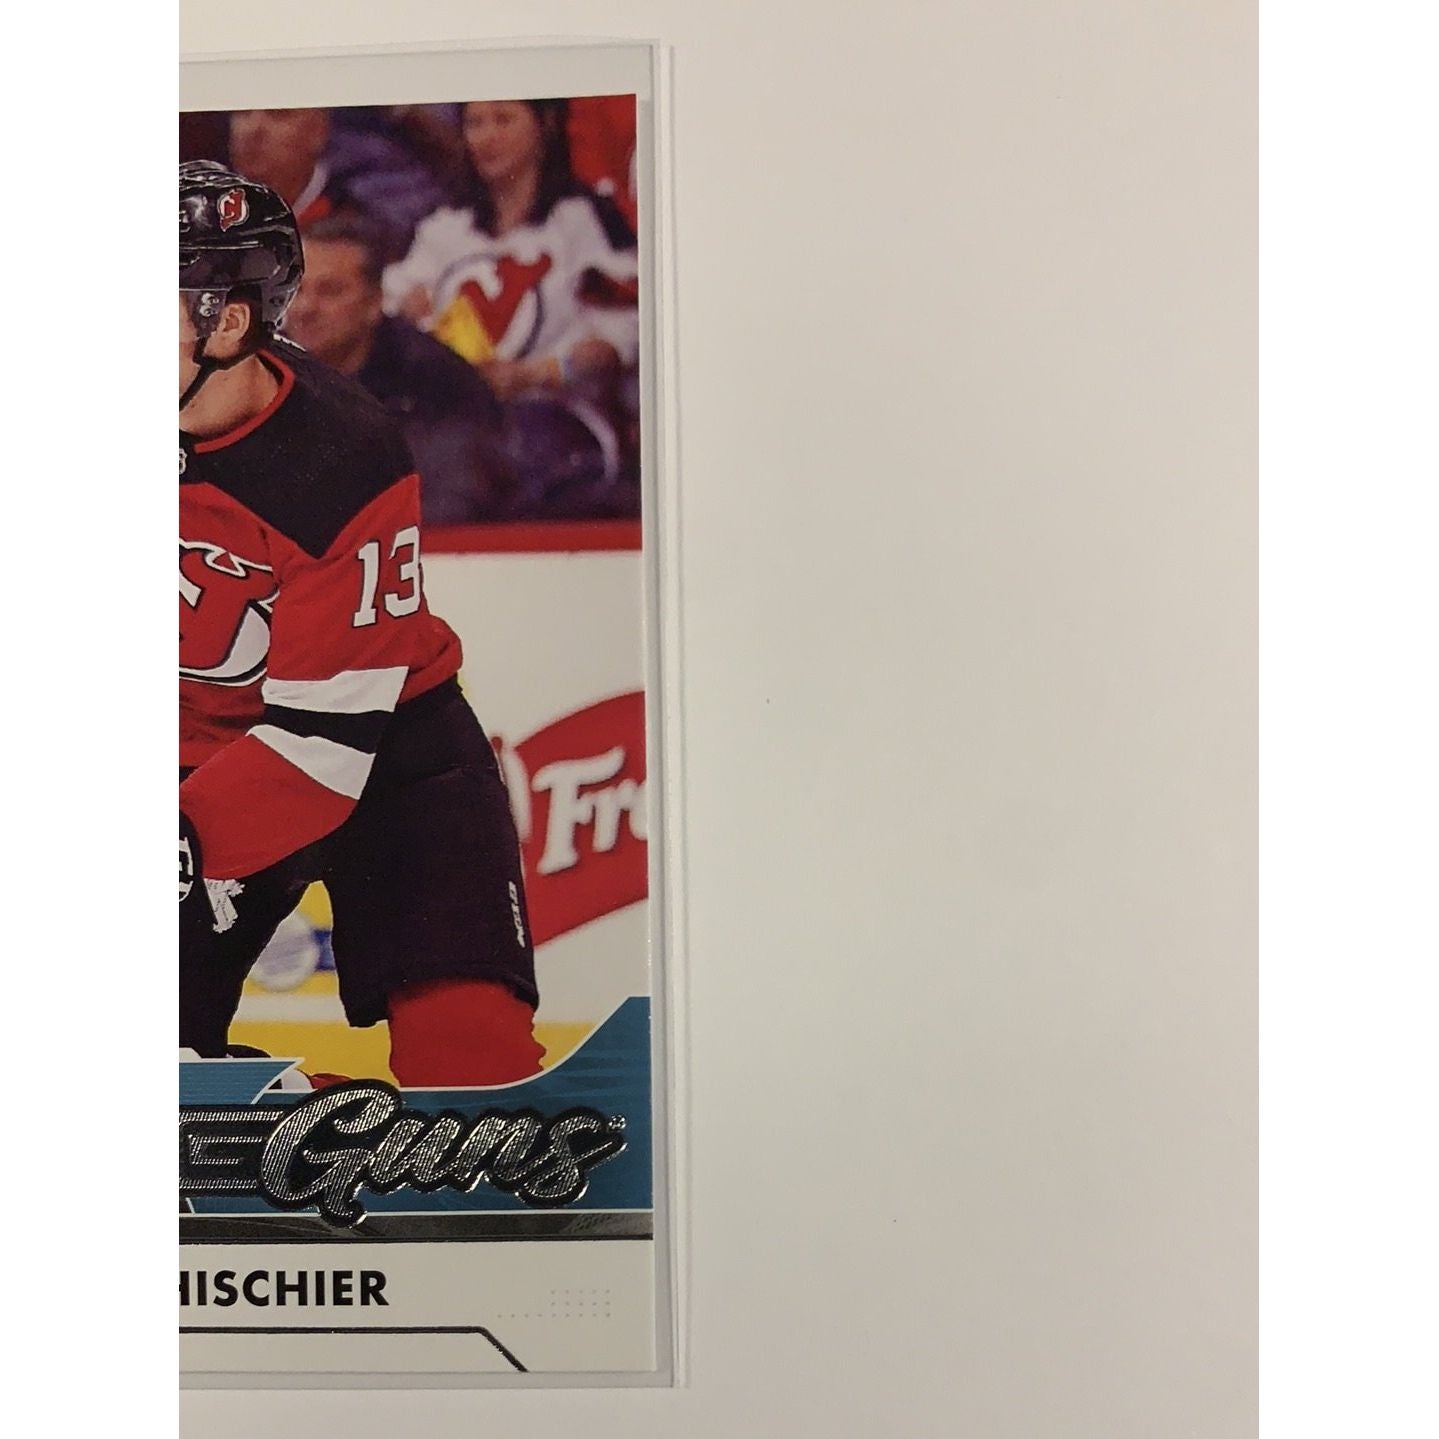  2017-18 Upper Deck Series 1 Nico Hischier Young Guns  Local Legends Cards & Collectibles